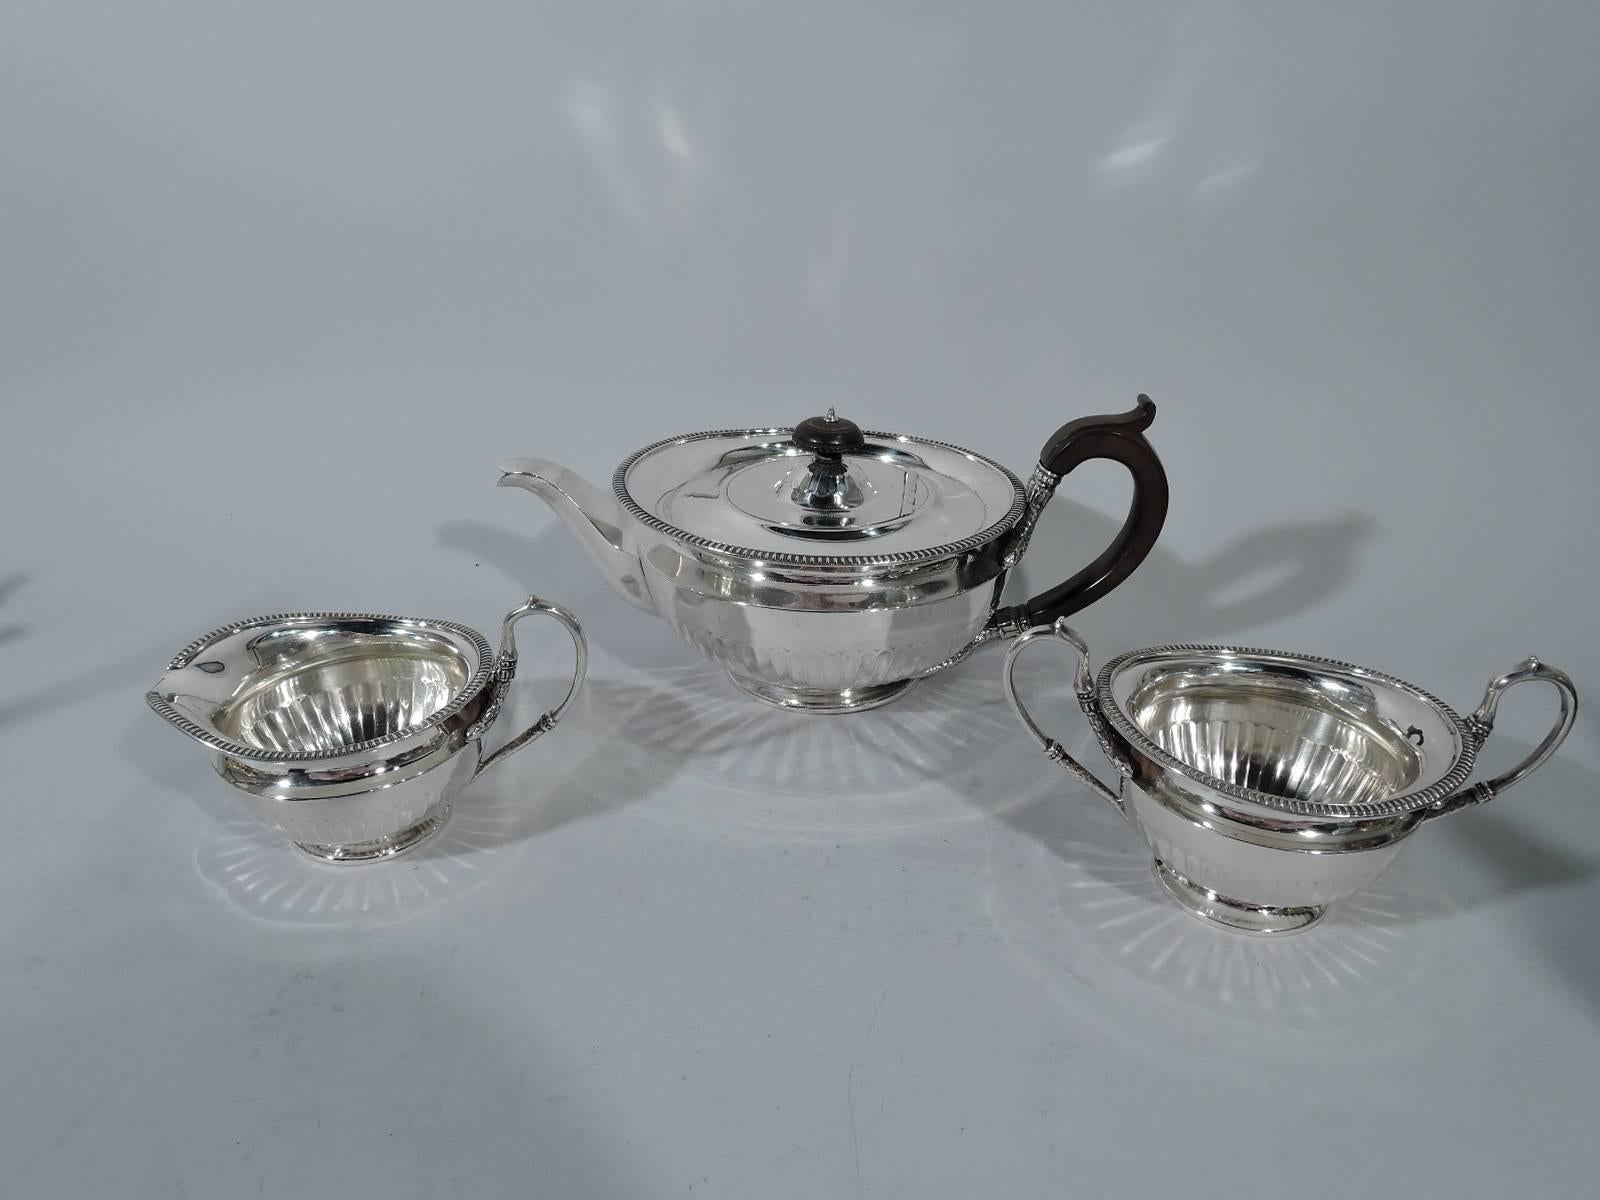 Regency Revival sterling silver tea set. Made by Hamilton & Inches in Edinburgh in 1923. This set comprises teapot, creamer, and sugar. All: Curved and tapering sides on raised foot. Gardrooned rim. Shallow and shimmering half fluting. Capped